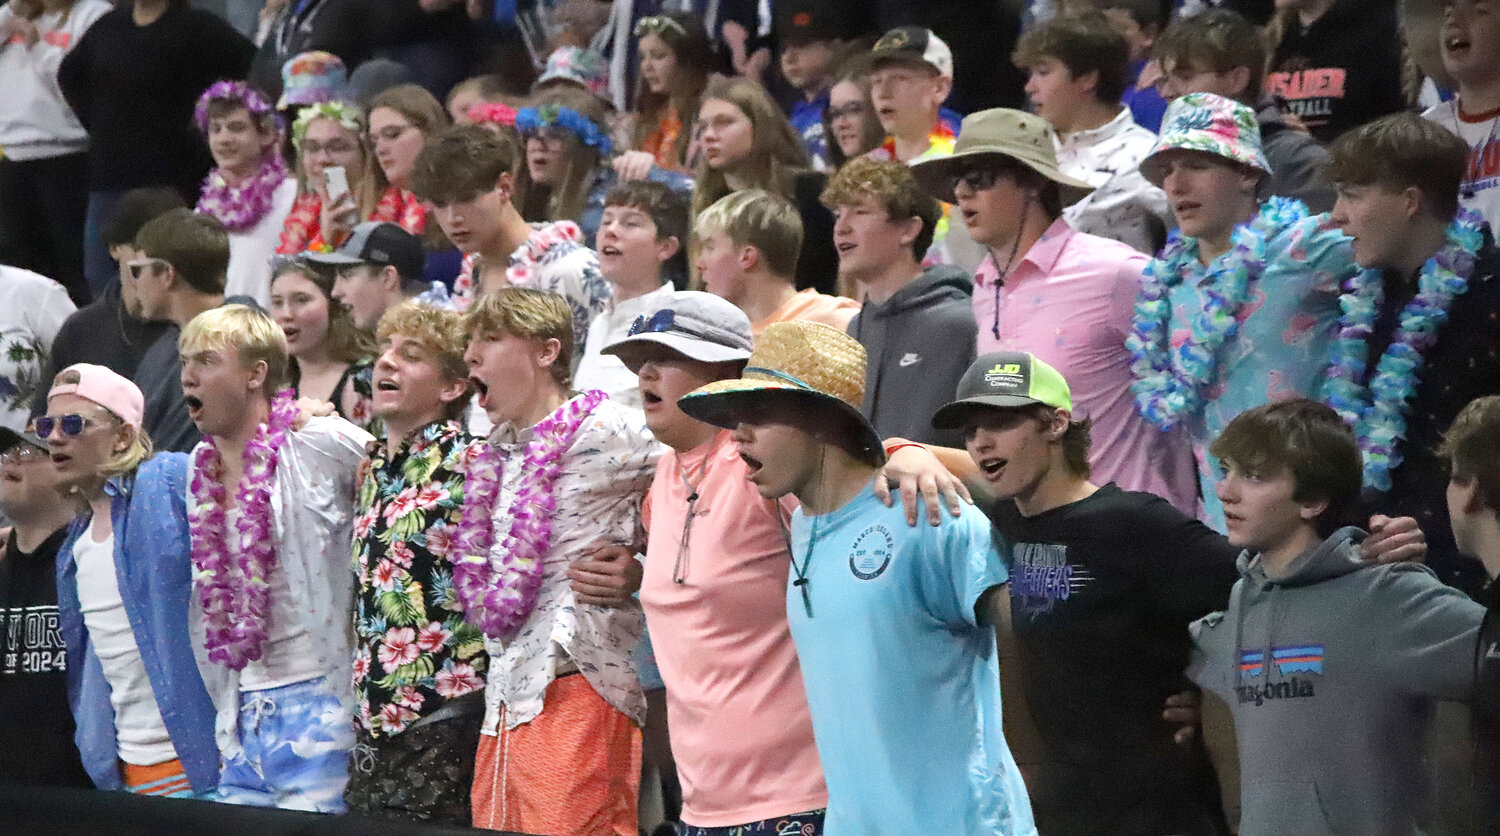 The student section decked out in beach garb cheers on the Crusaders at the Xtreme Arena in Coralville Tuesday night during the IGHSAU quarterfinals of the State Volleyball Tournament.